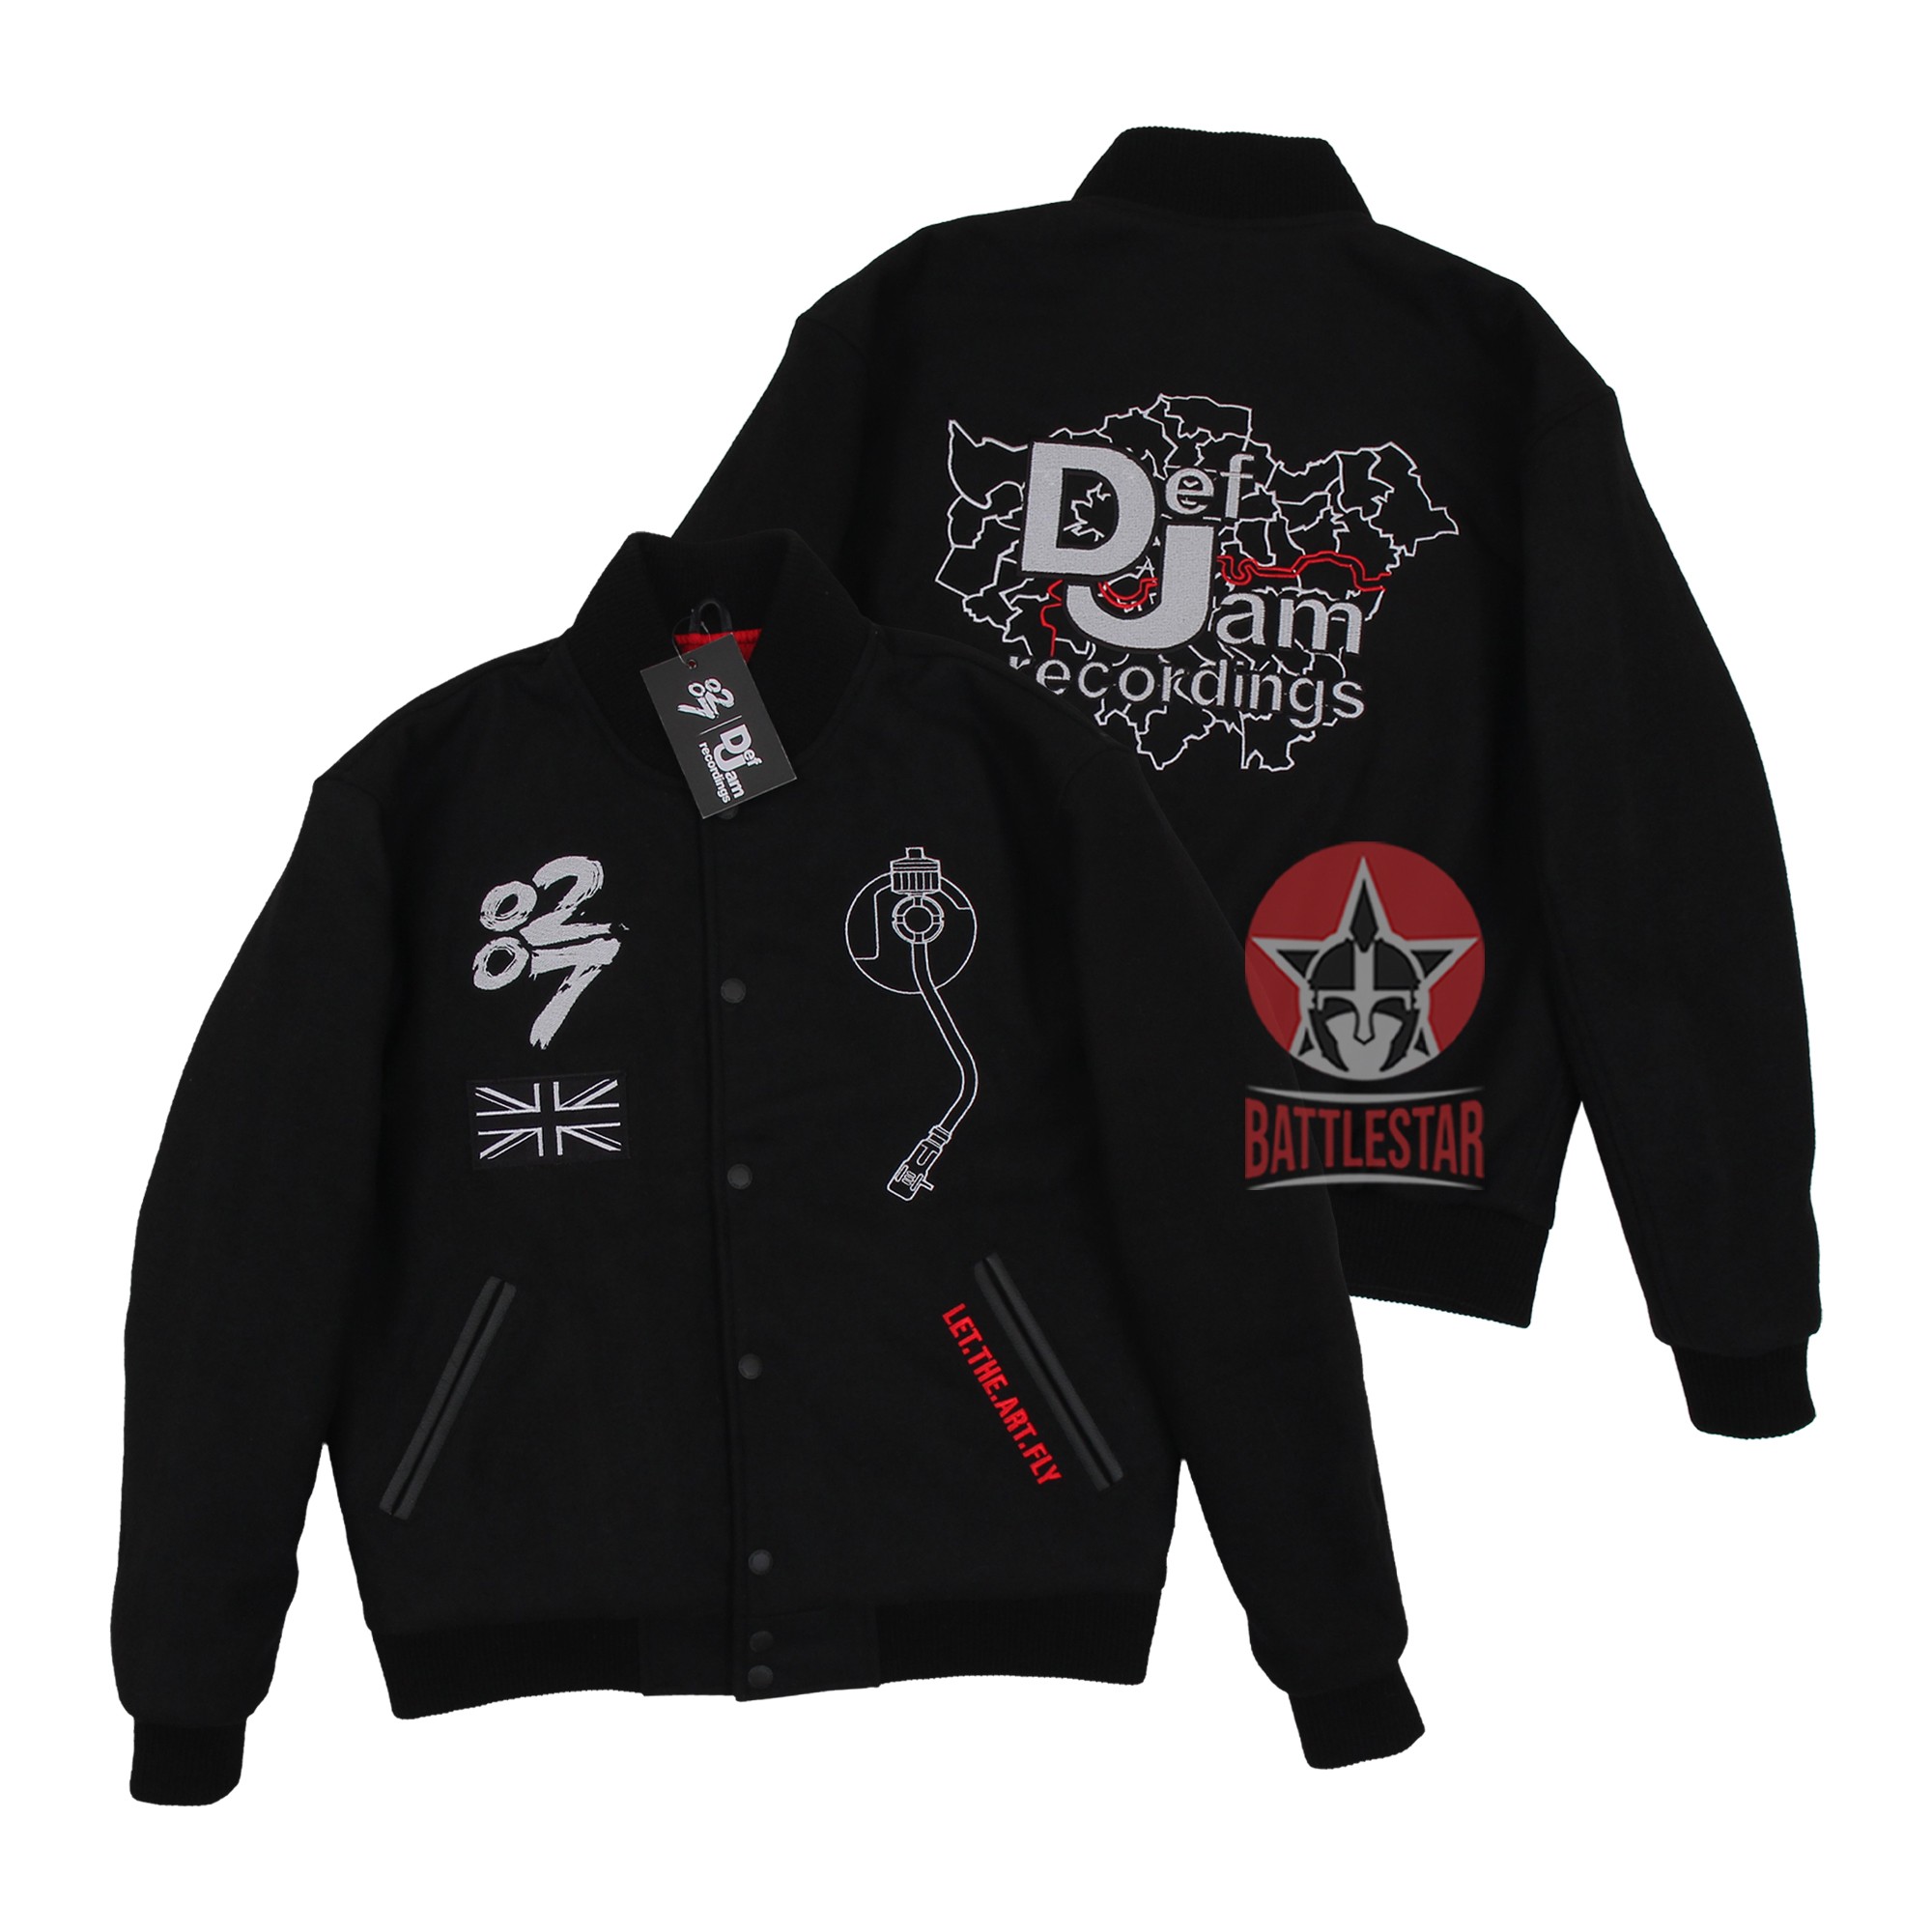 A Personalized Full Wool Embroidered Def Jam Recordings Varsity Jacket